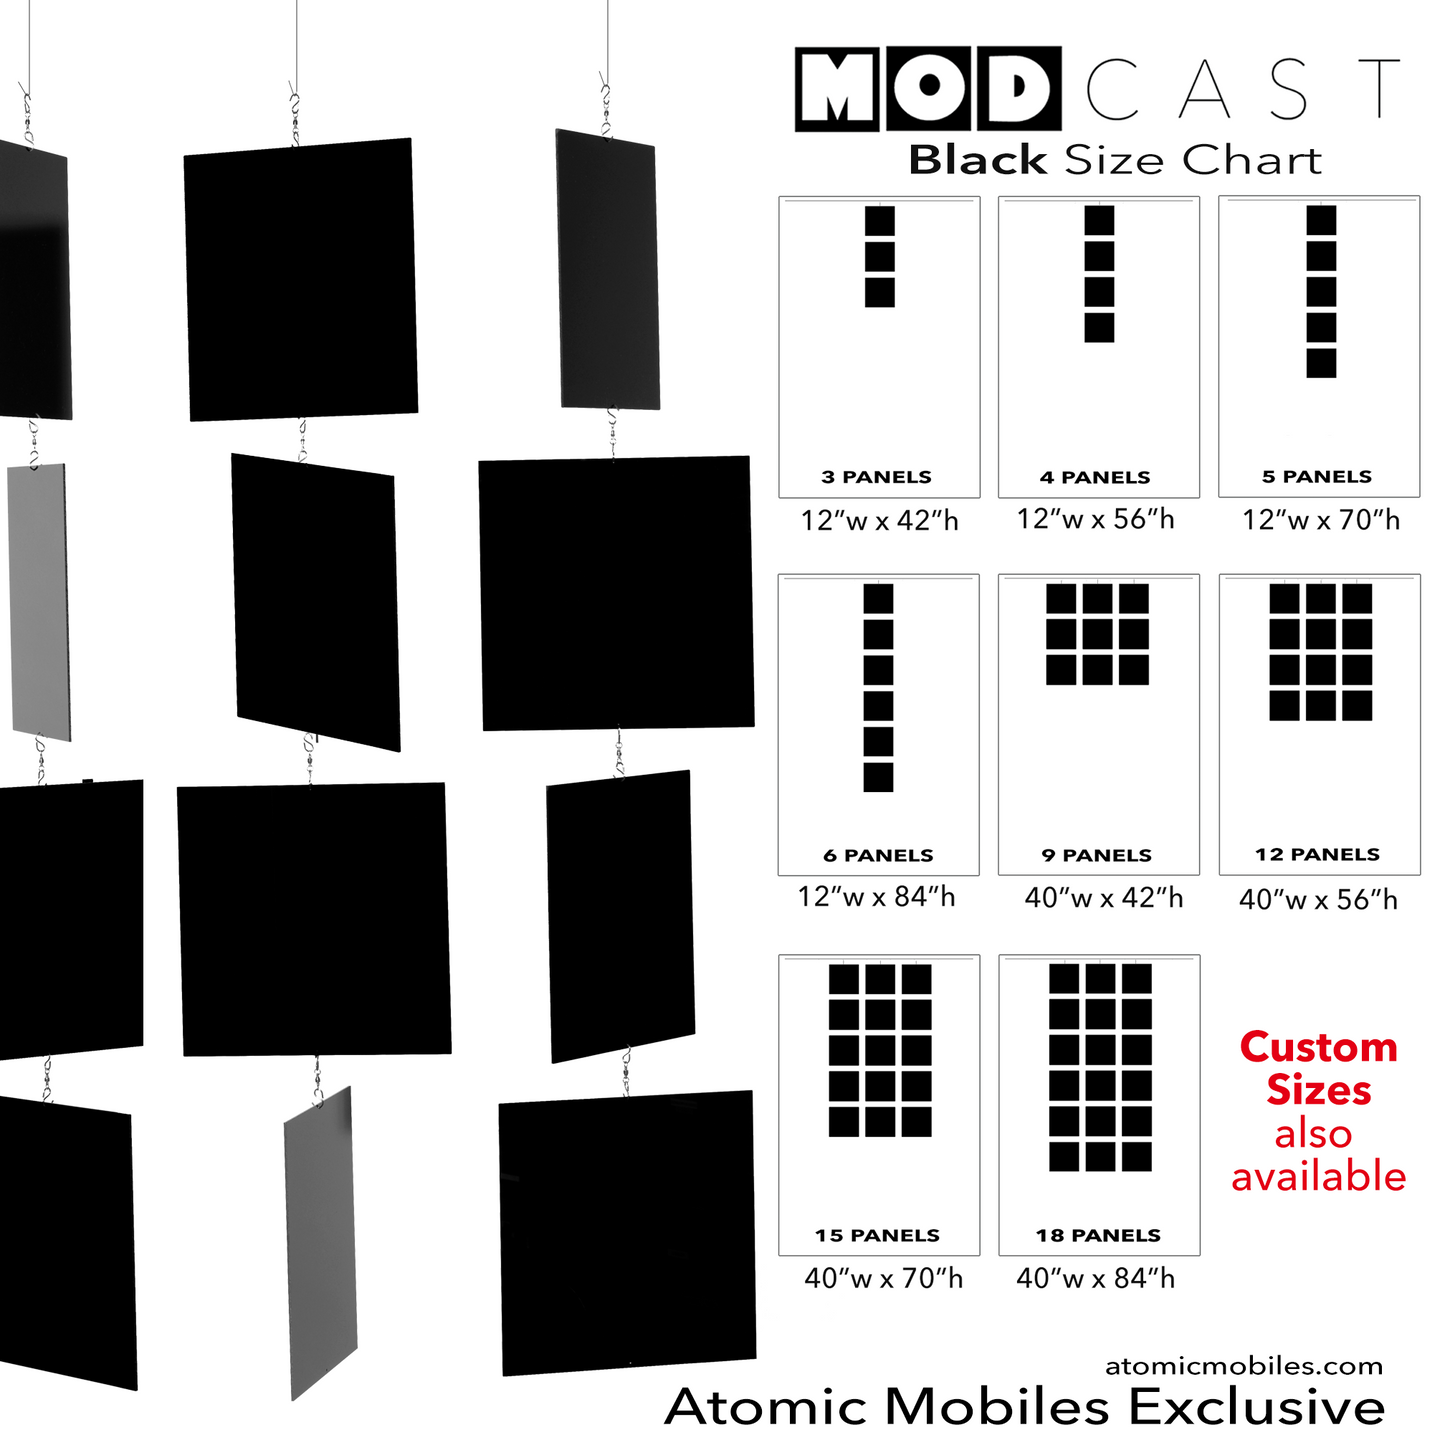 Size Chart for Black MODcast Hanging Art Mobiles - mid century modern style kinetic art by AtomicMobiles.com